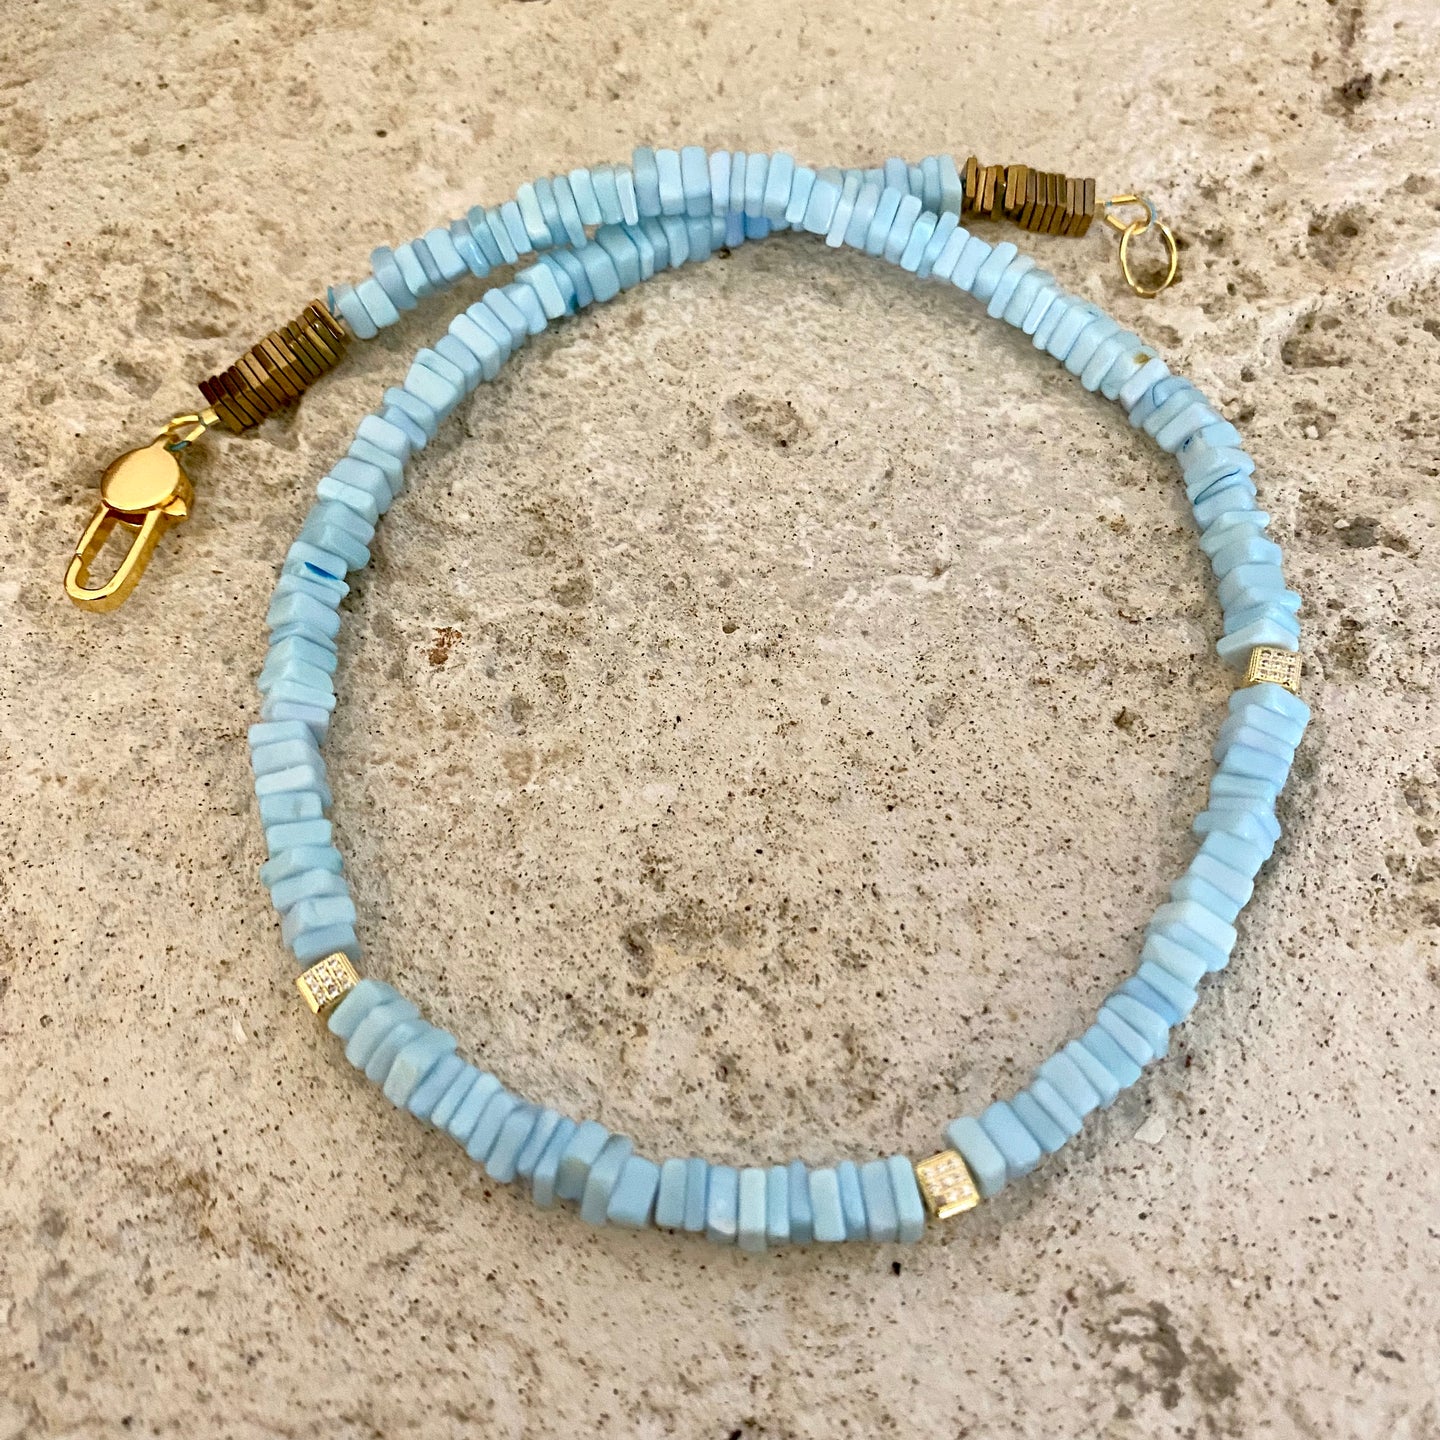 Blue Peru Opal Choker Necklace with Gold Vermeil Details and Lobster Clasp, 16